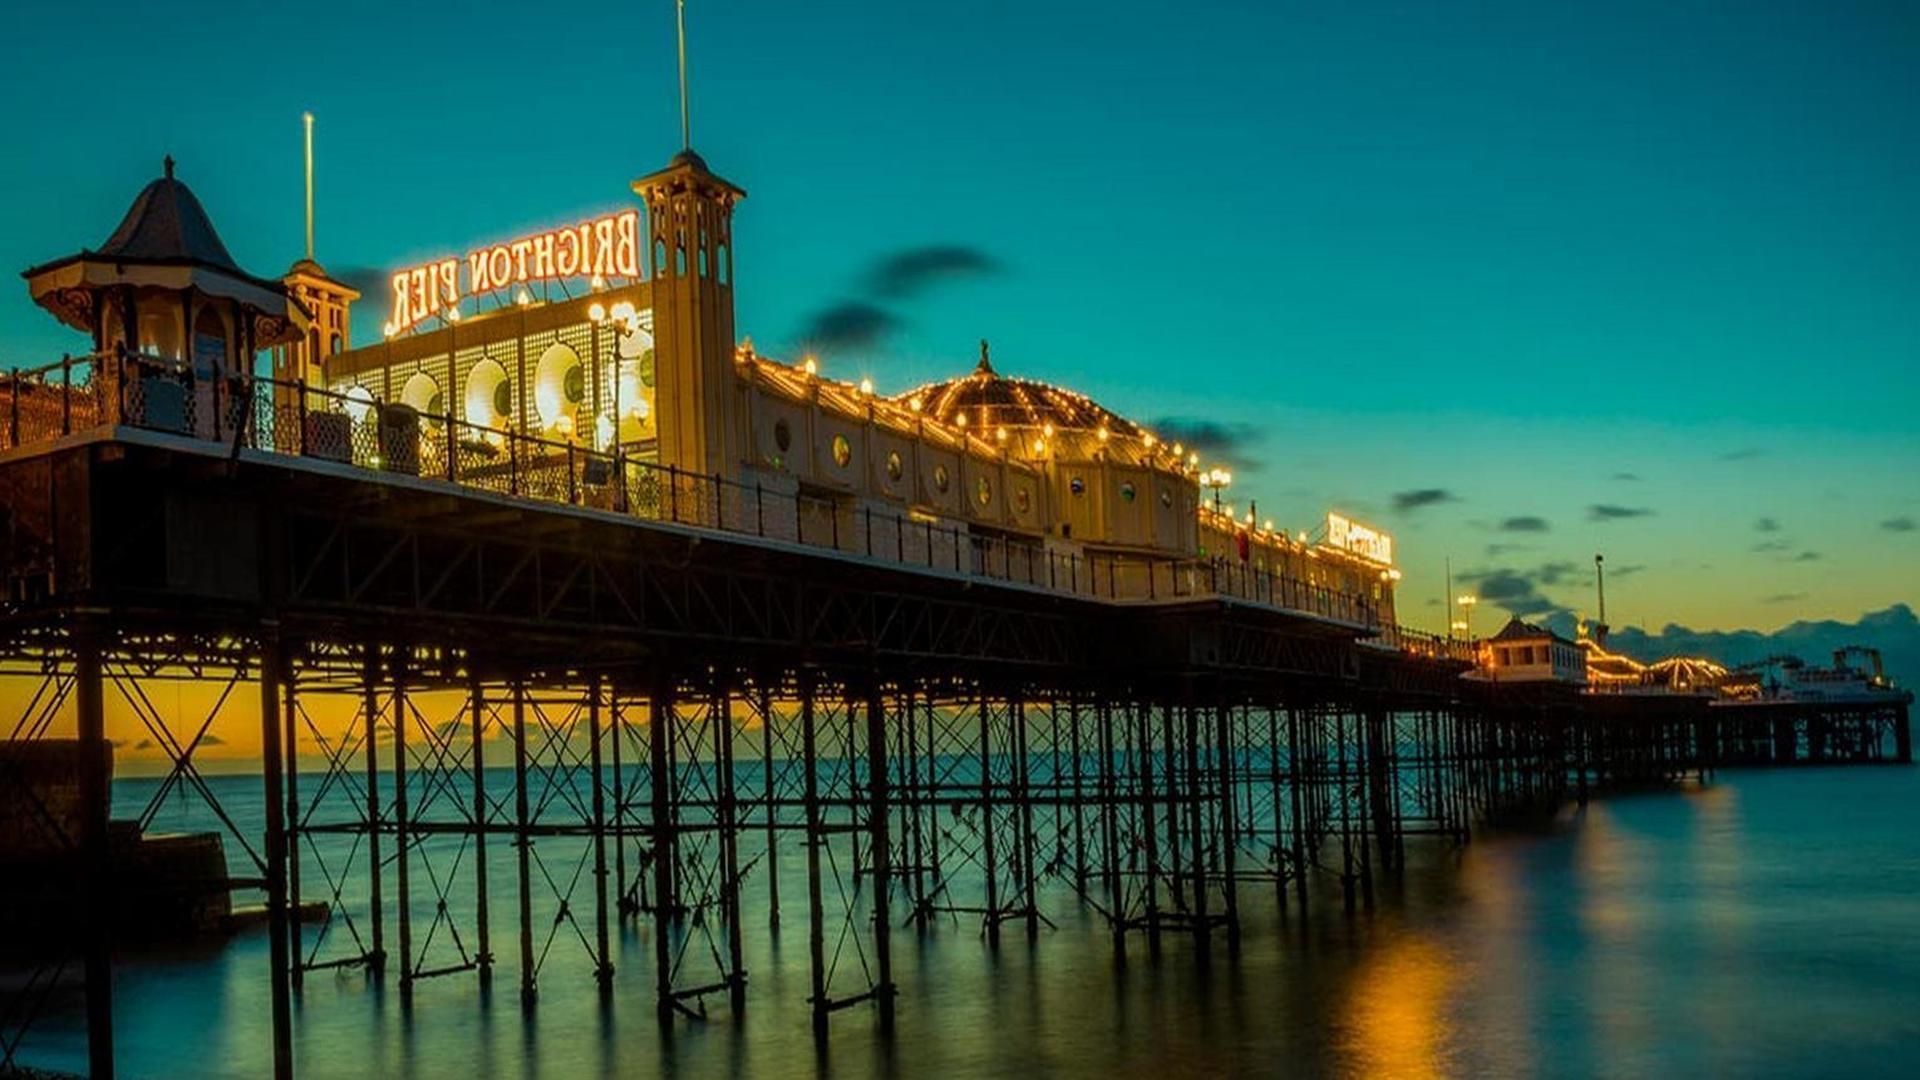 https://madaboutbrighton.co.uk/assets/images/10%20Things%20You%20Didnt%20Know%20About%20Brighton%20Pier/10-Things-You-Didnt-Know-About-Brighton-Pier_8.jpg